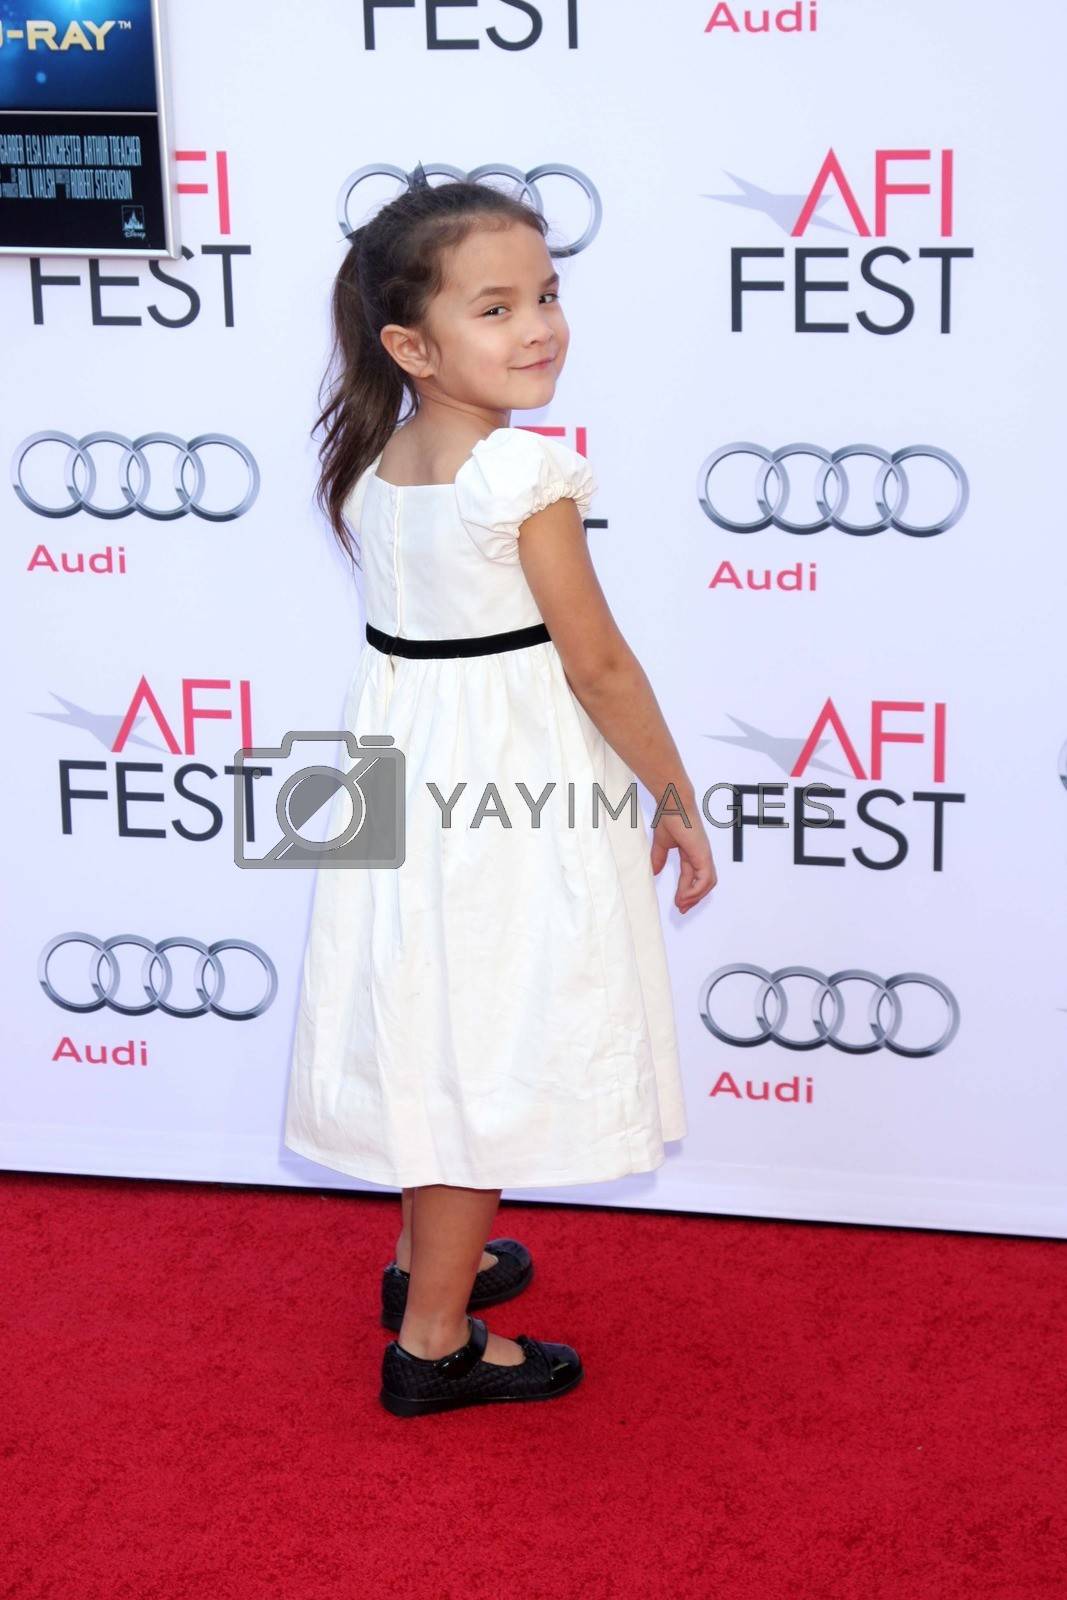 Royalty free image of Jojo Bereic at the AFI FEST "Mary Poppins" 50th Anniversary Commemoration Screening, Chinese Theater, Hollywood, CA 11-09-13/ImageCollect by ImageCollect